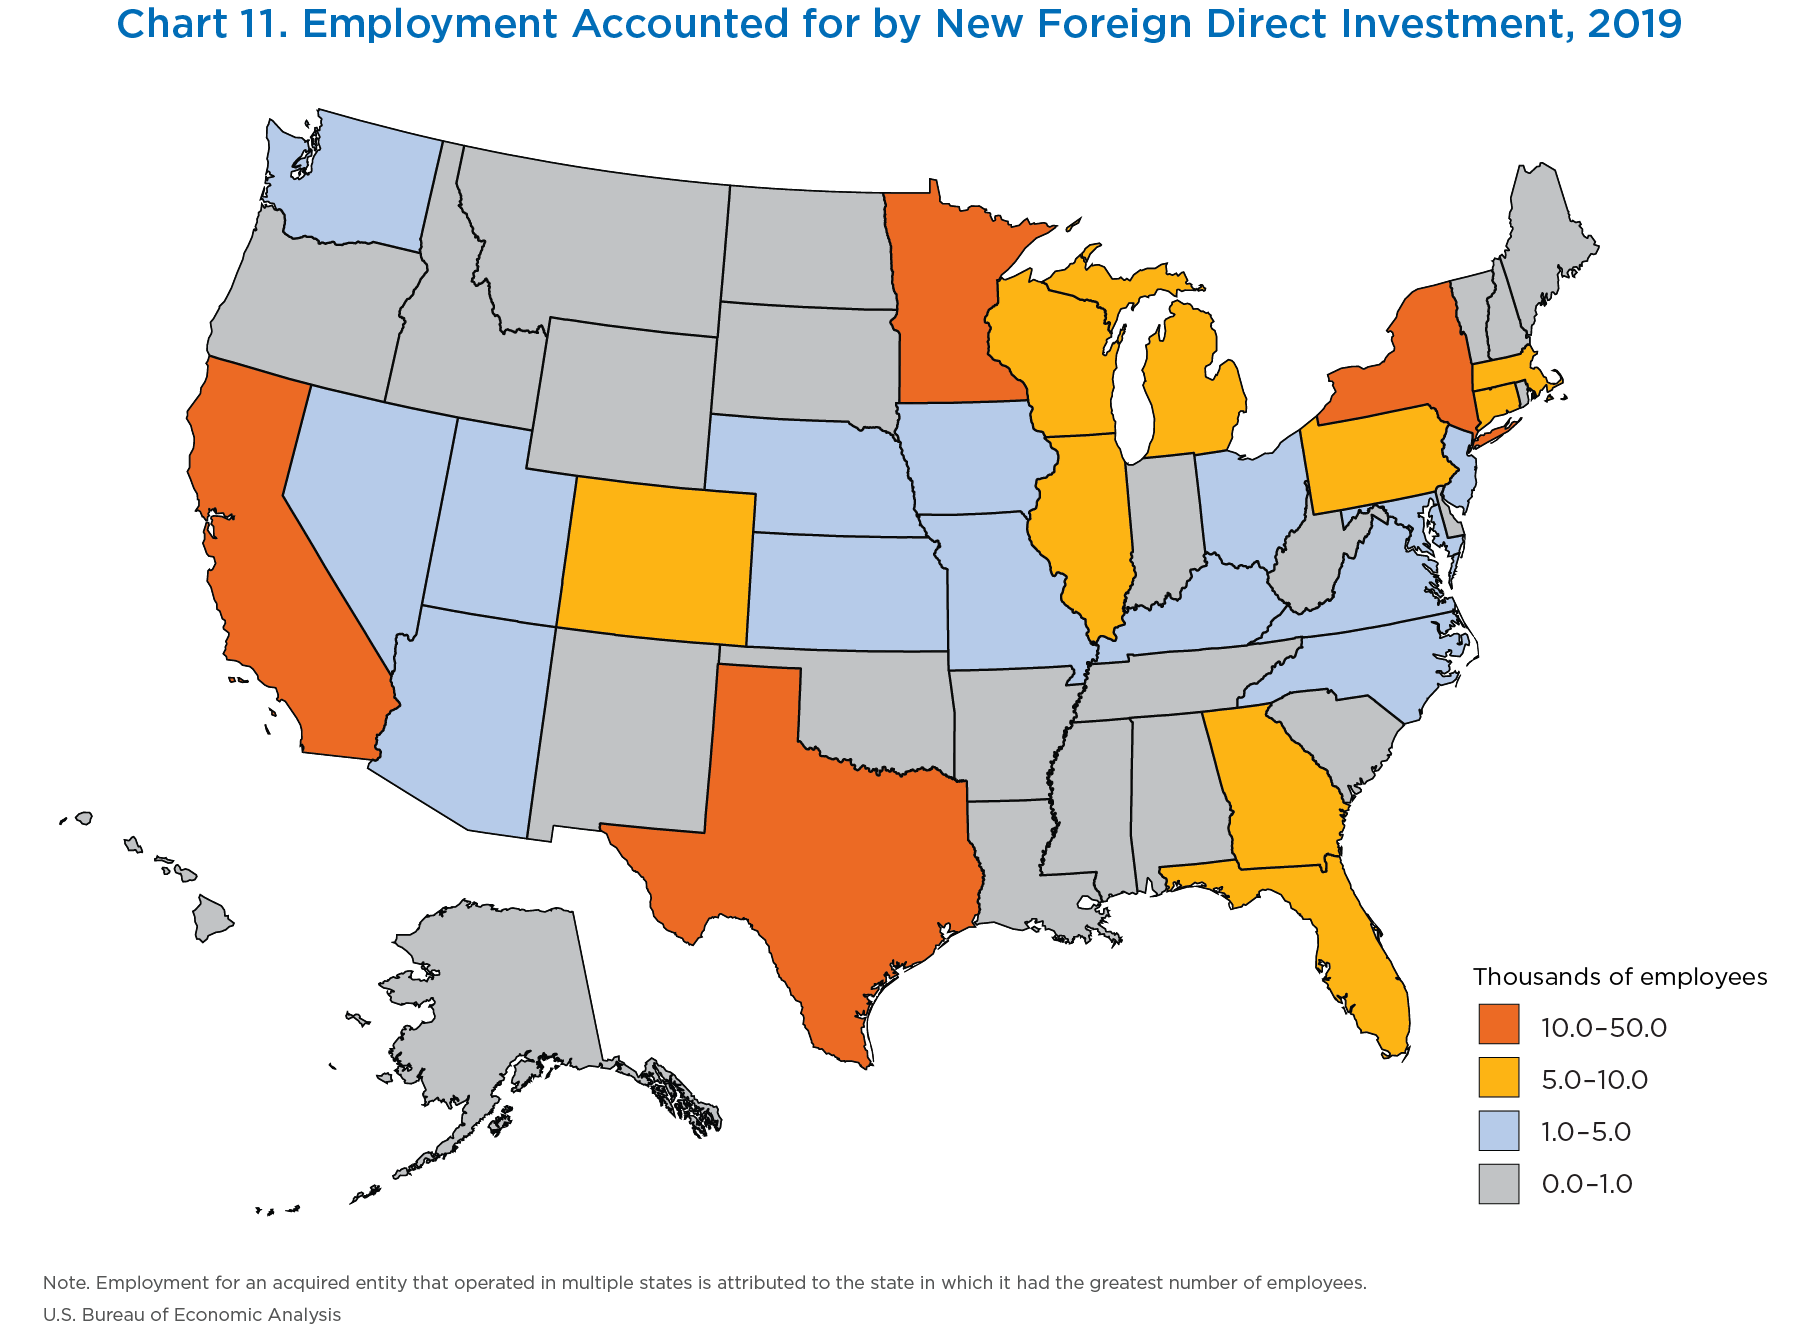 New Foreign Direct Investment in the United States in 2019